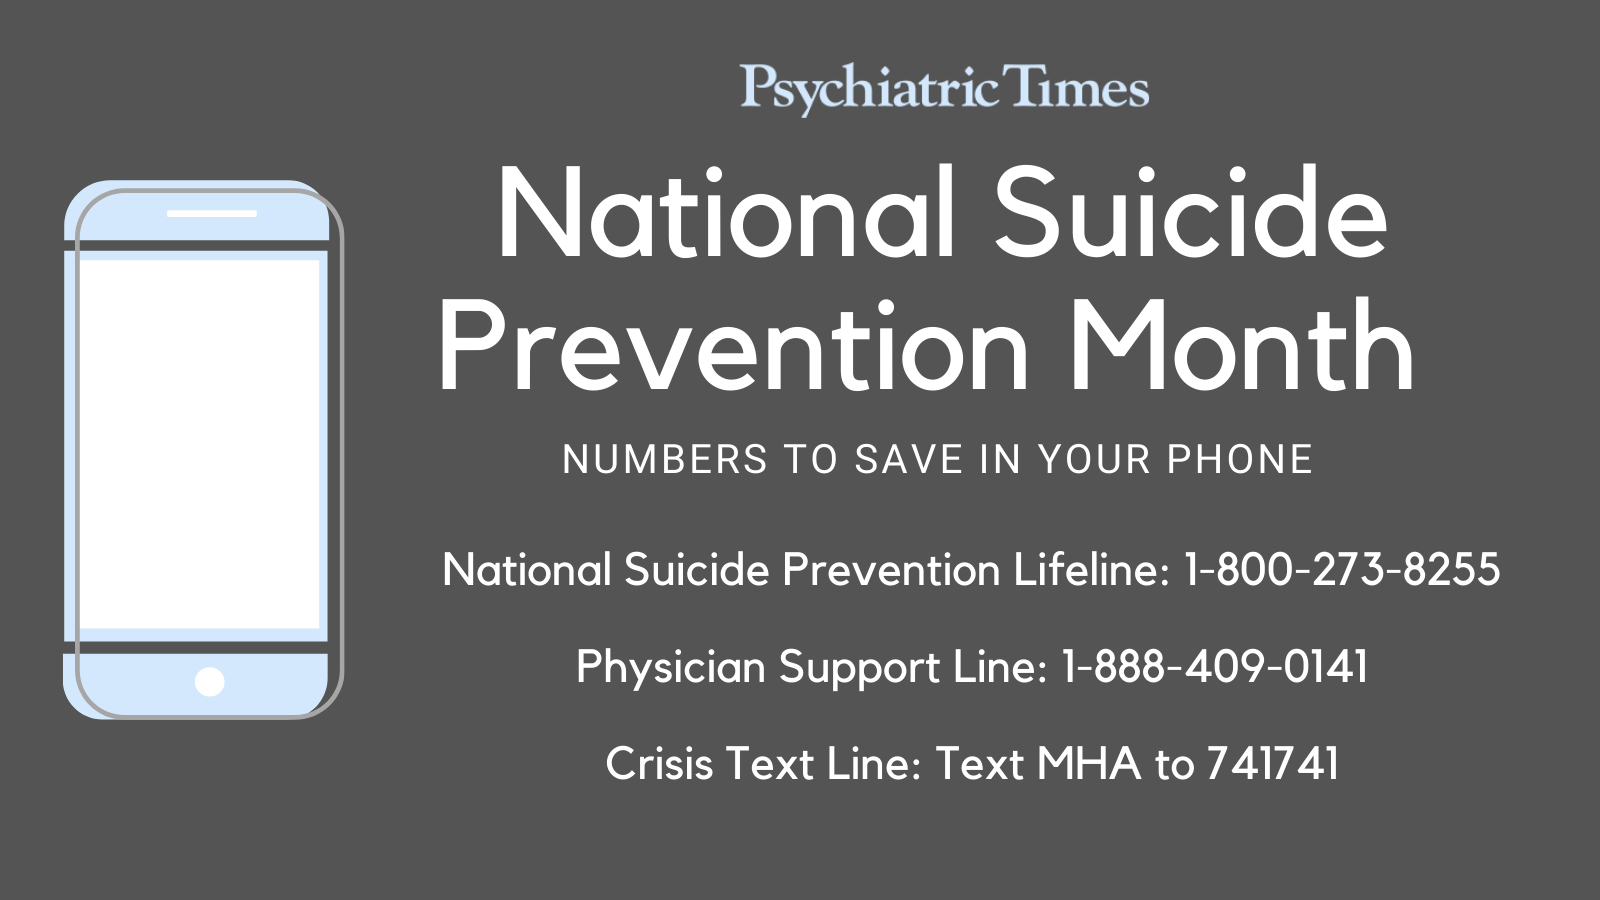 Phone Numbers to Know for National Suicide Prevention Month